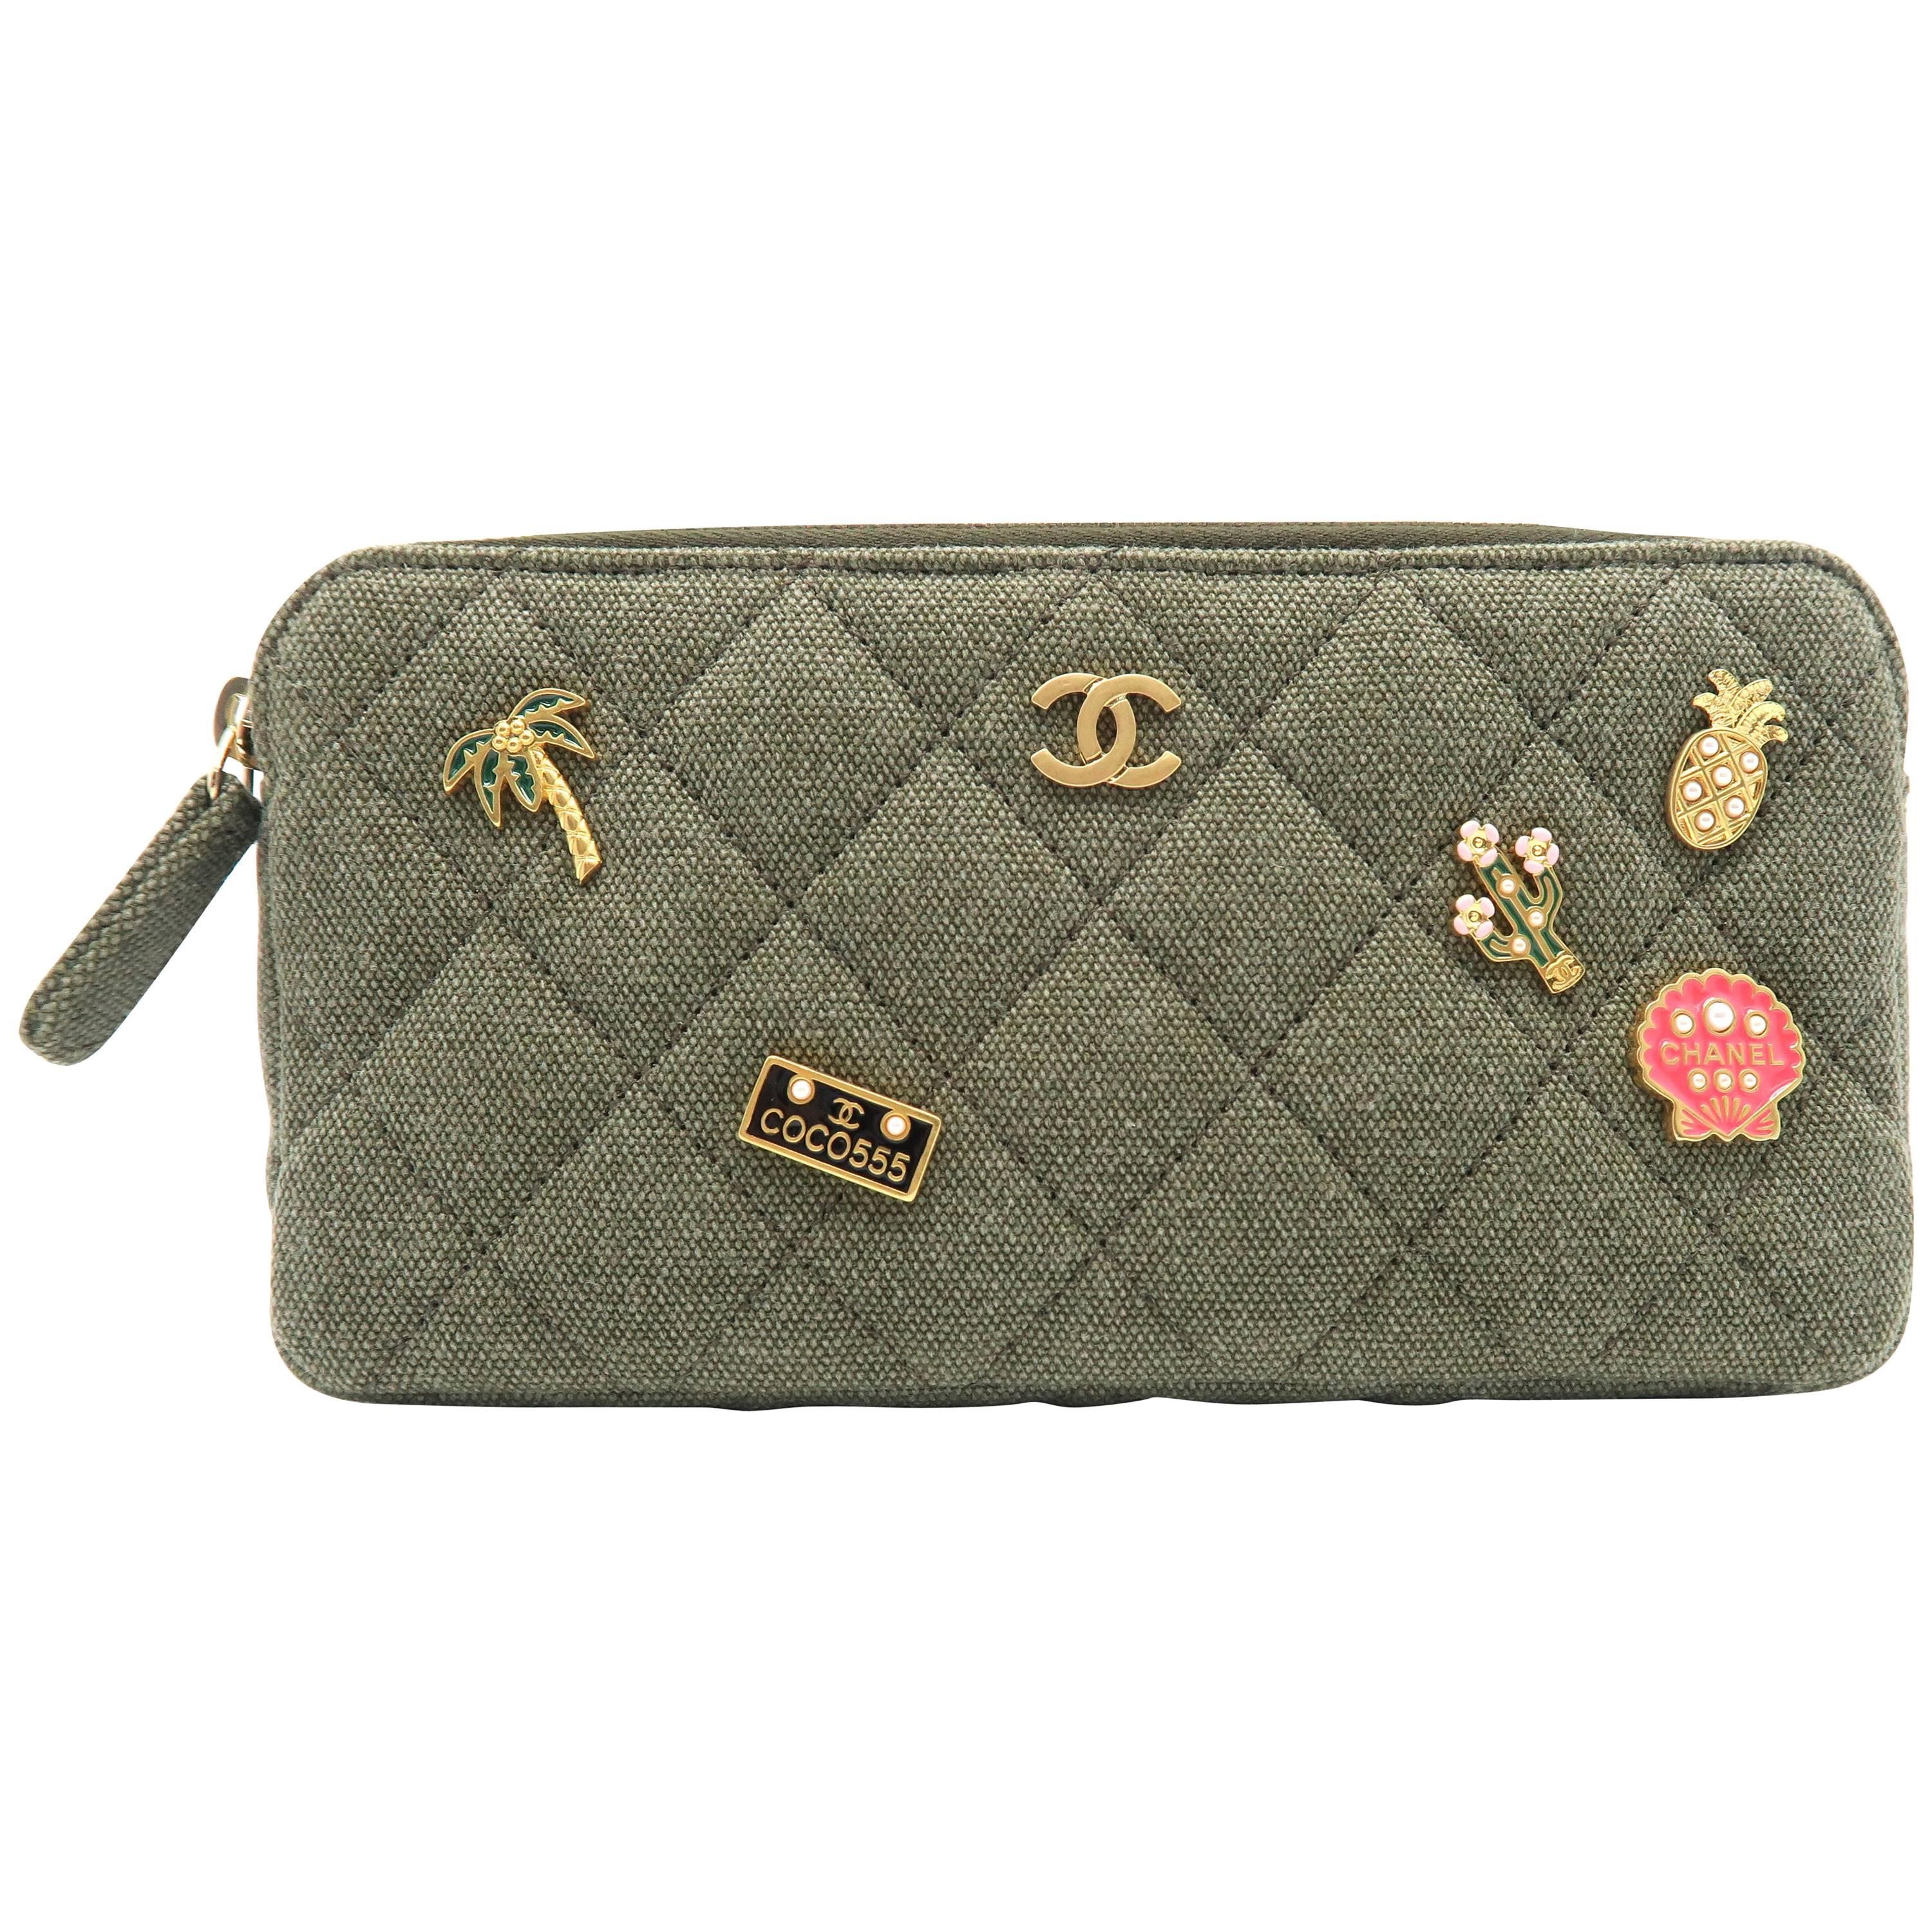 Chanel Khaki Quilted Canvas Charms Gold Metal Chain Shoulder Flap Bag